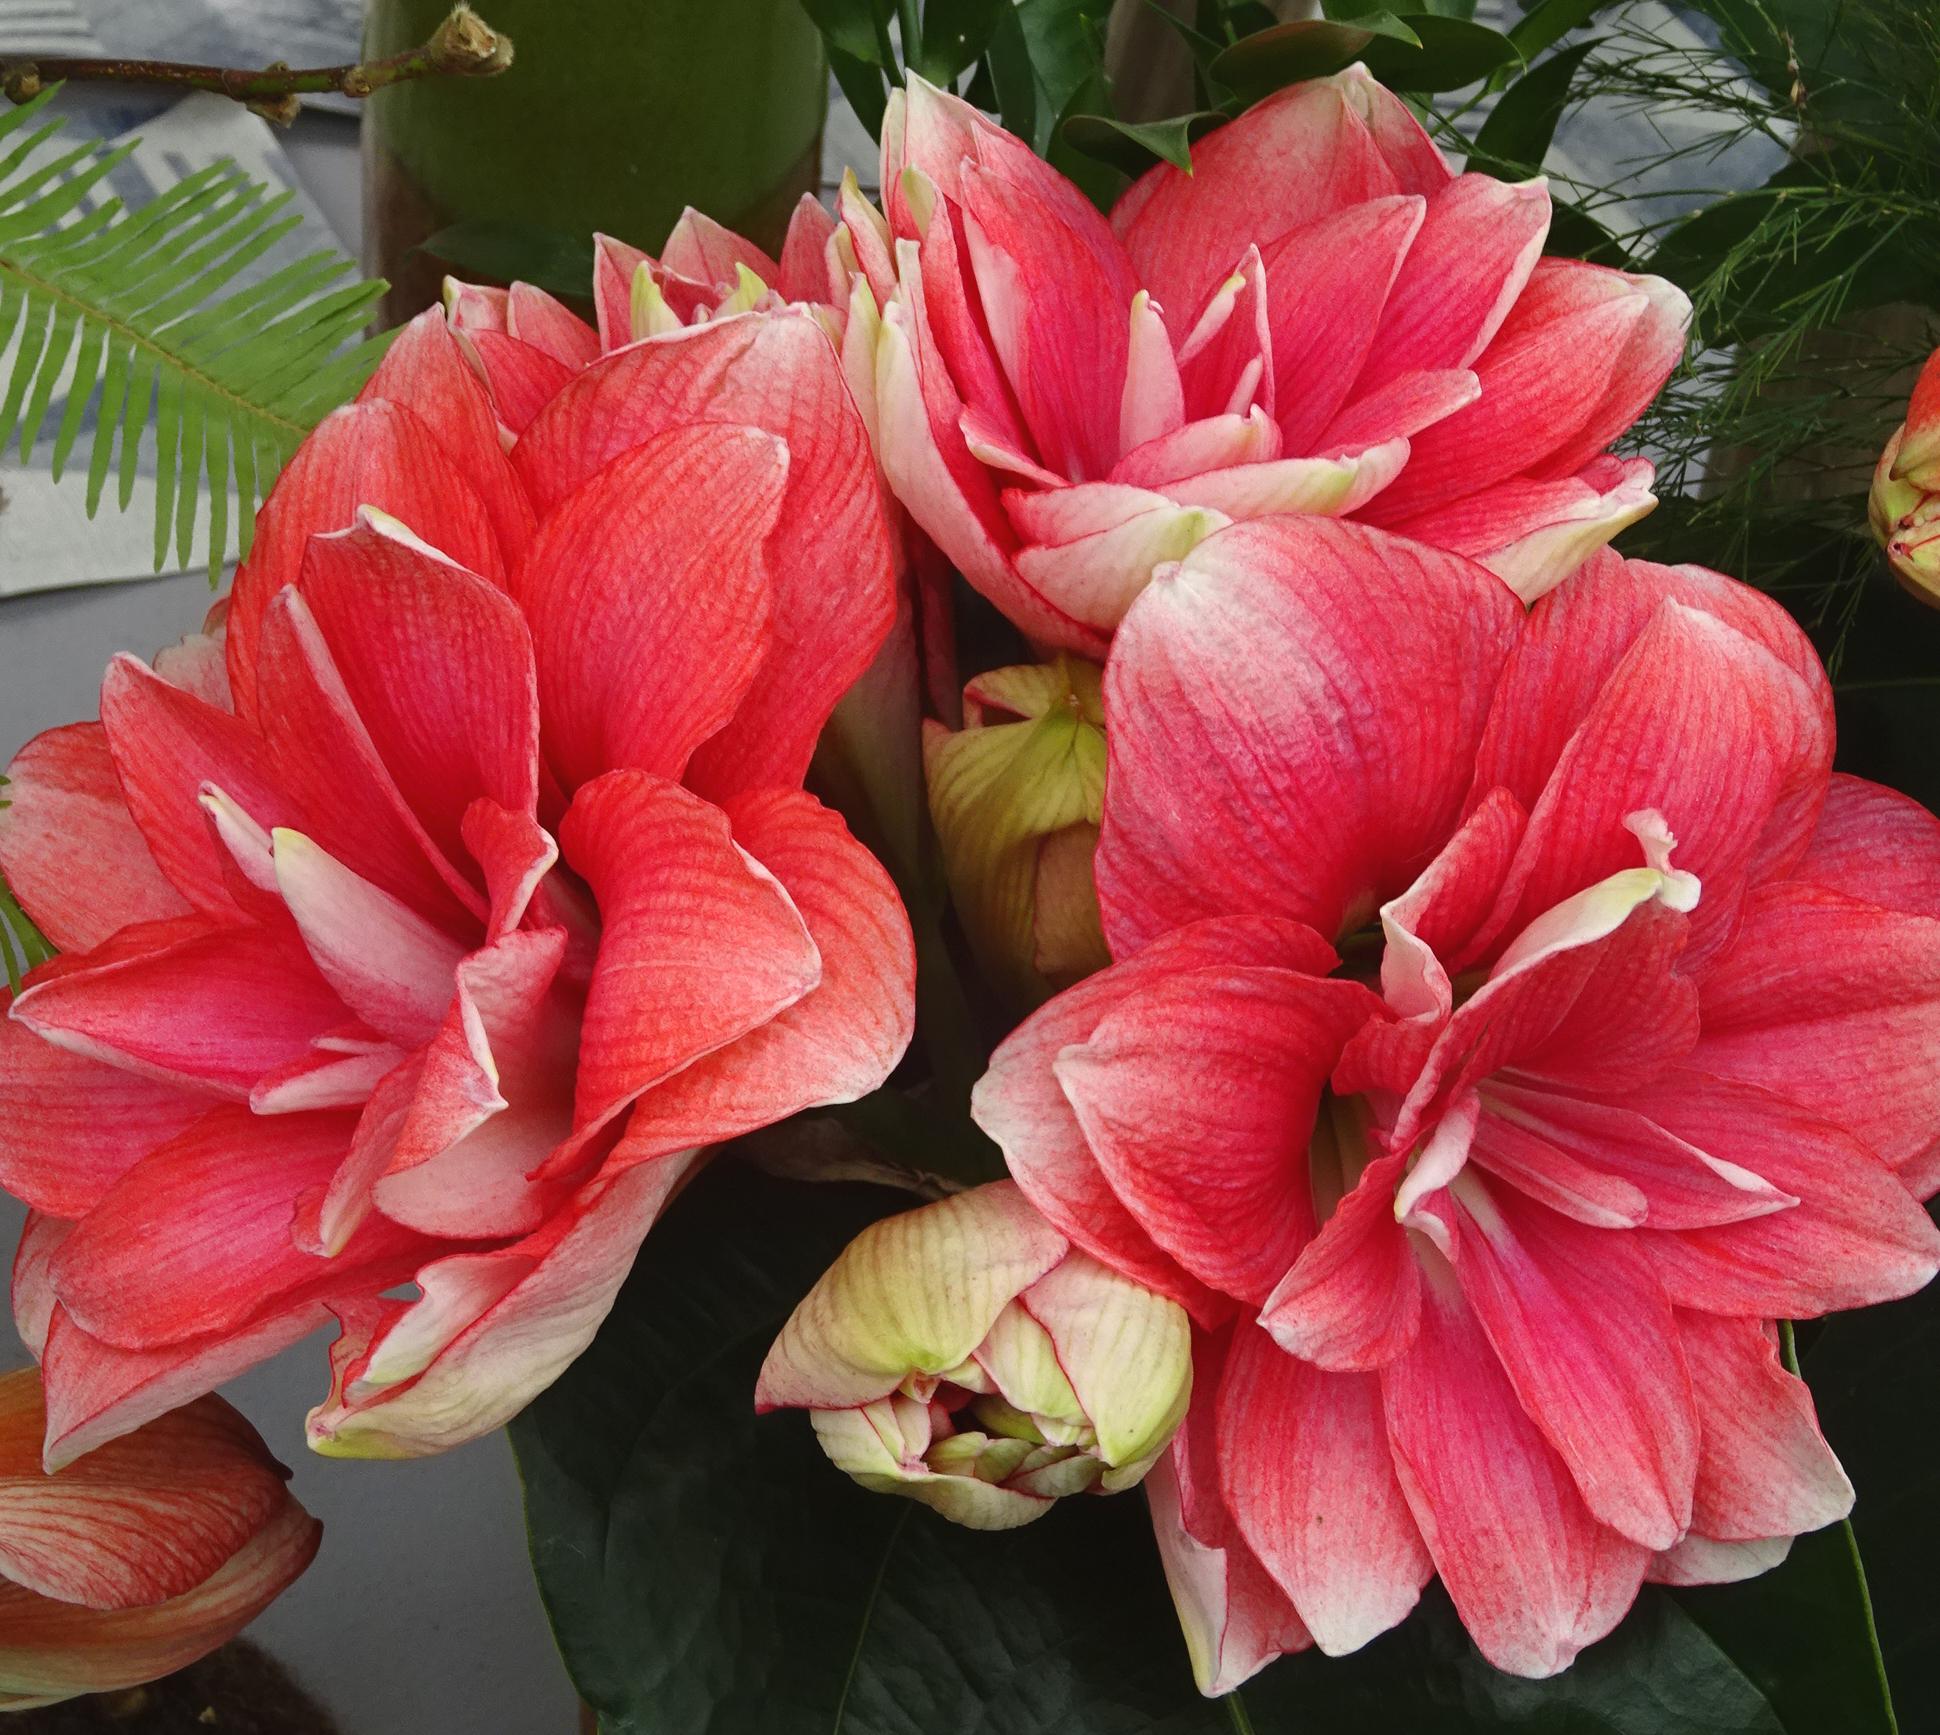 Hippeastrum Holland 'Double Dream' - Amaryllis (Shipping begins Oct. 2021) from Leo Berbee Bulb Company